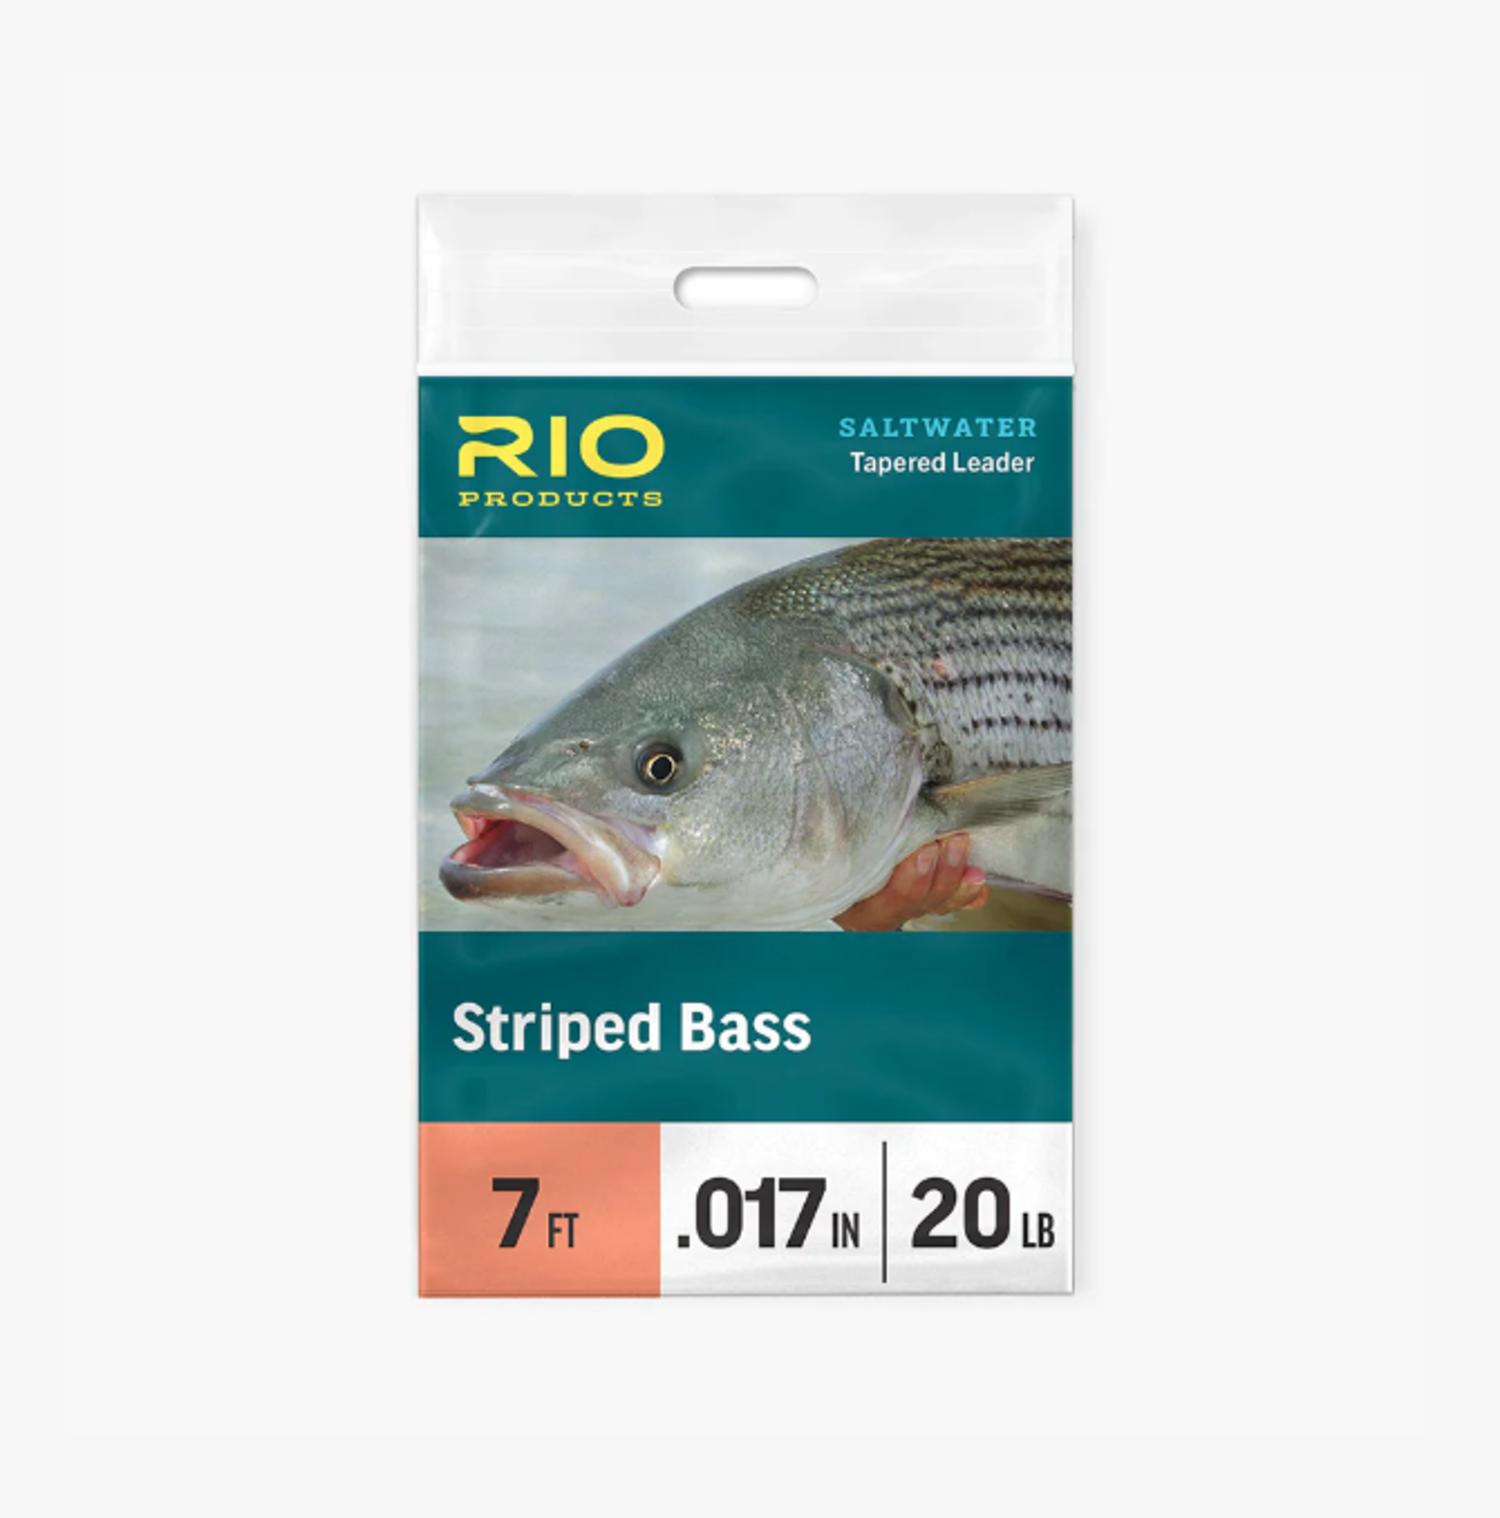 RIO Saltwater Tapered Leader